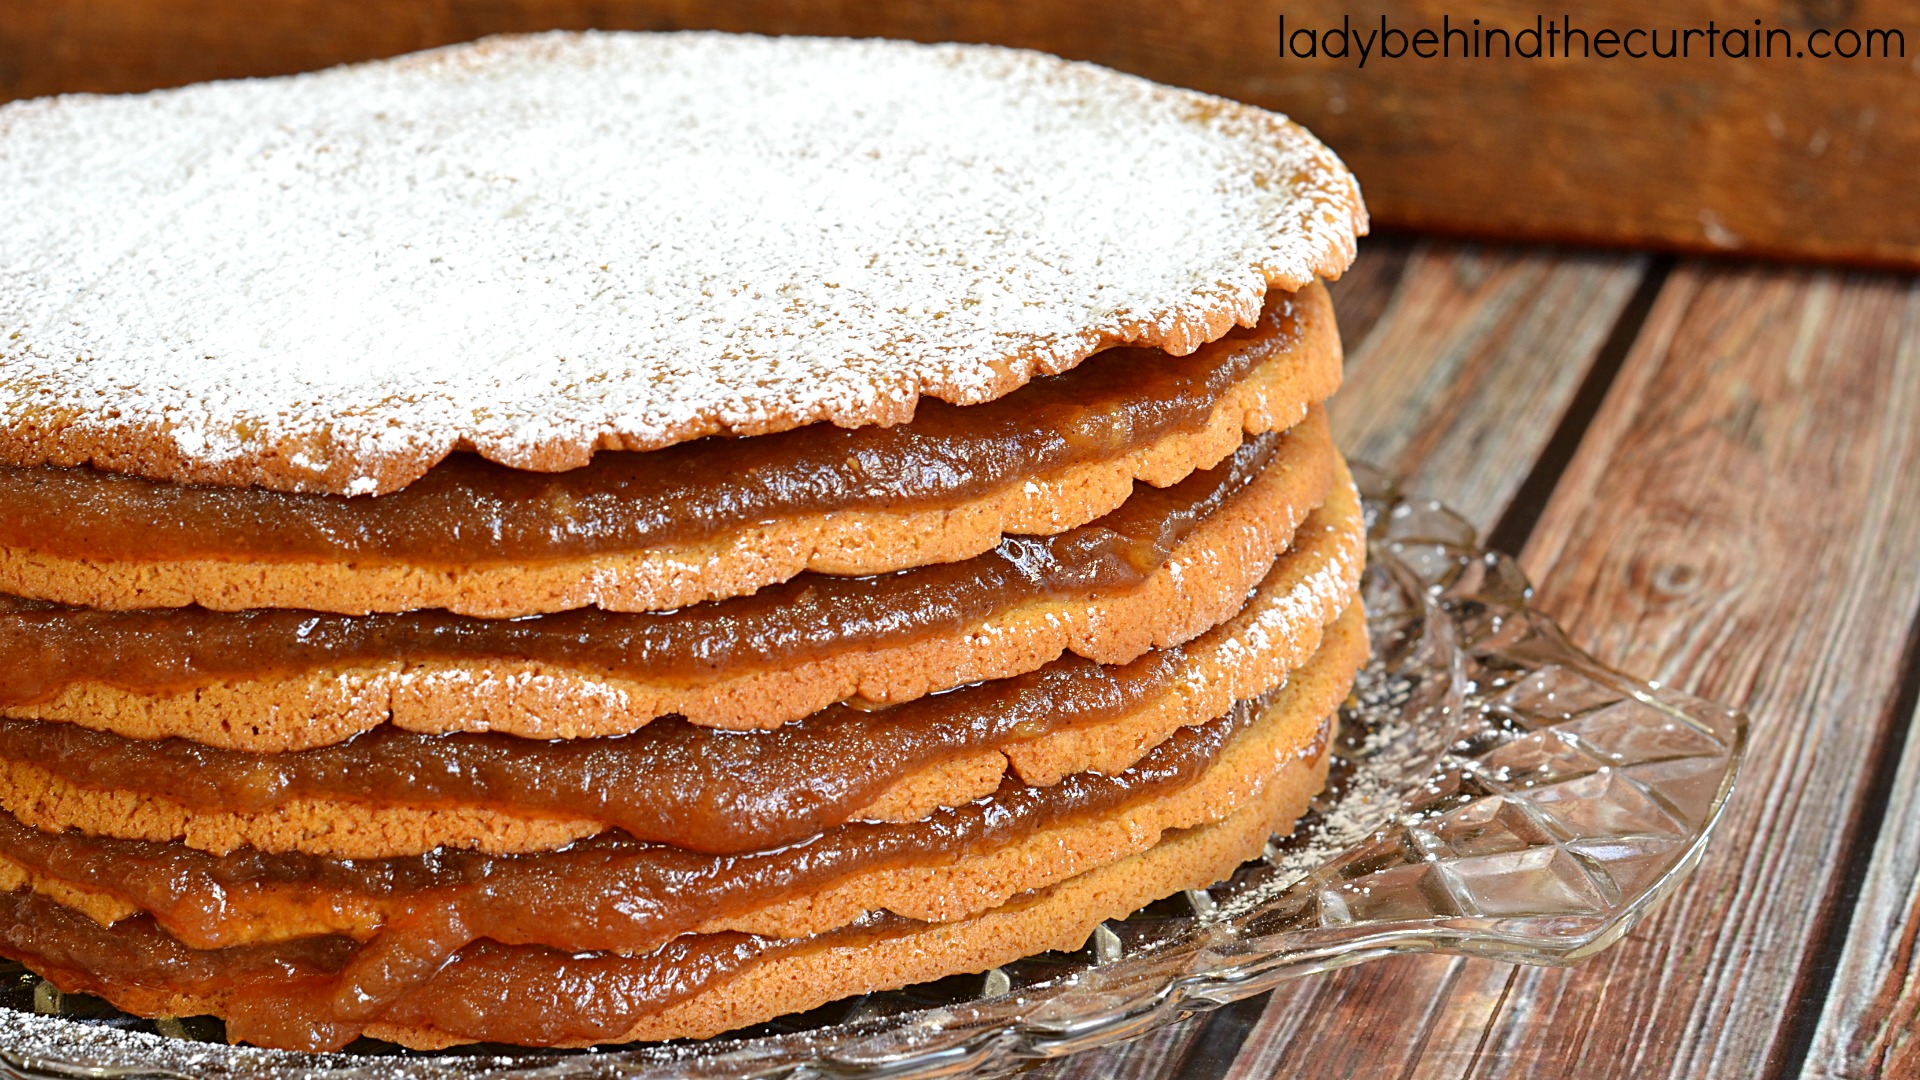 Old Fashioned Stack Cake